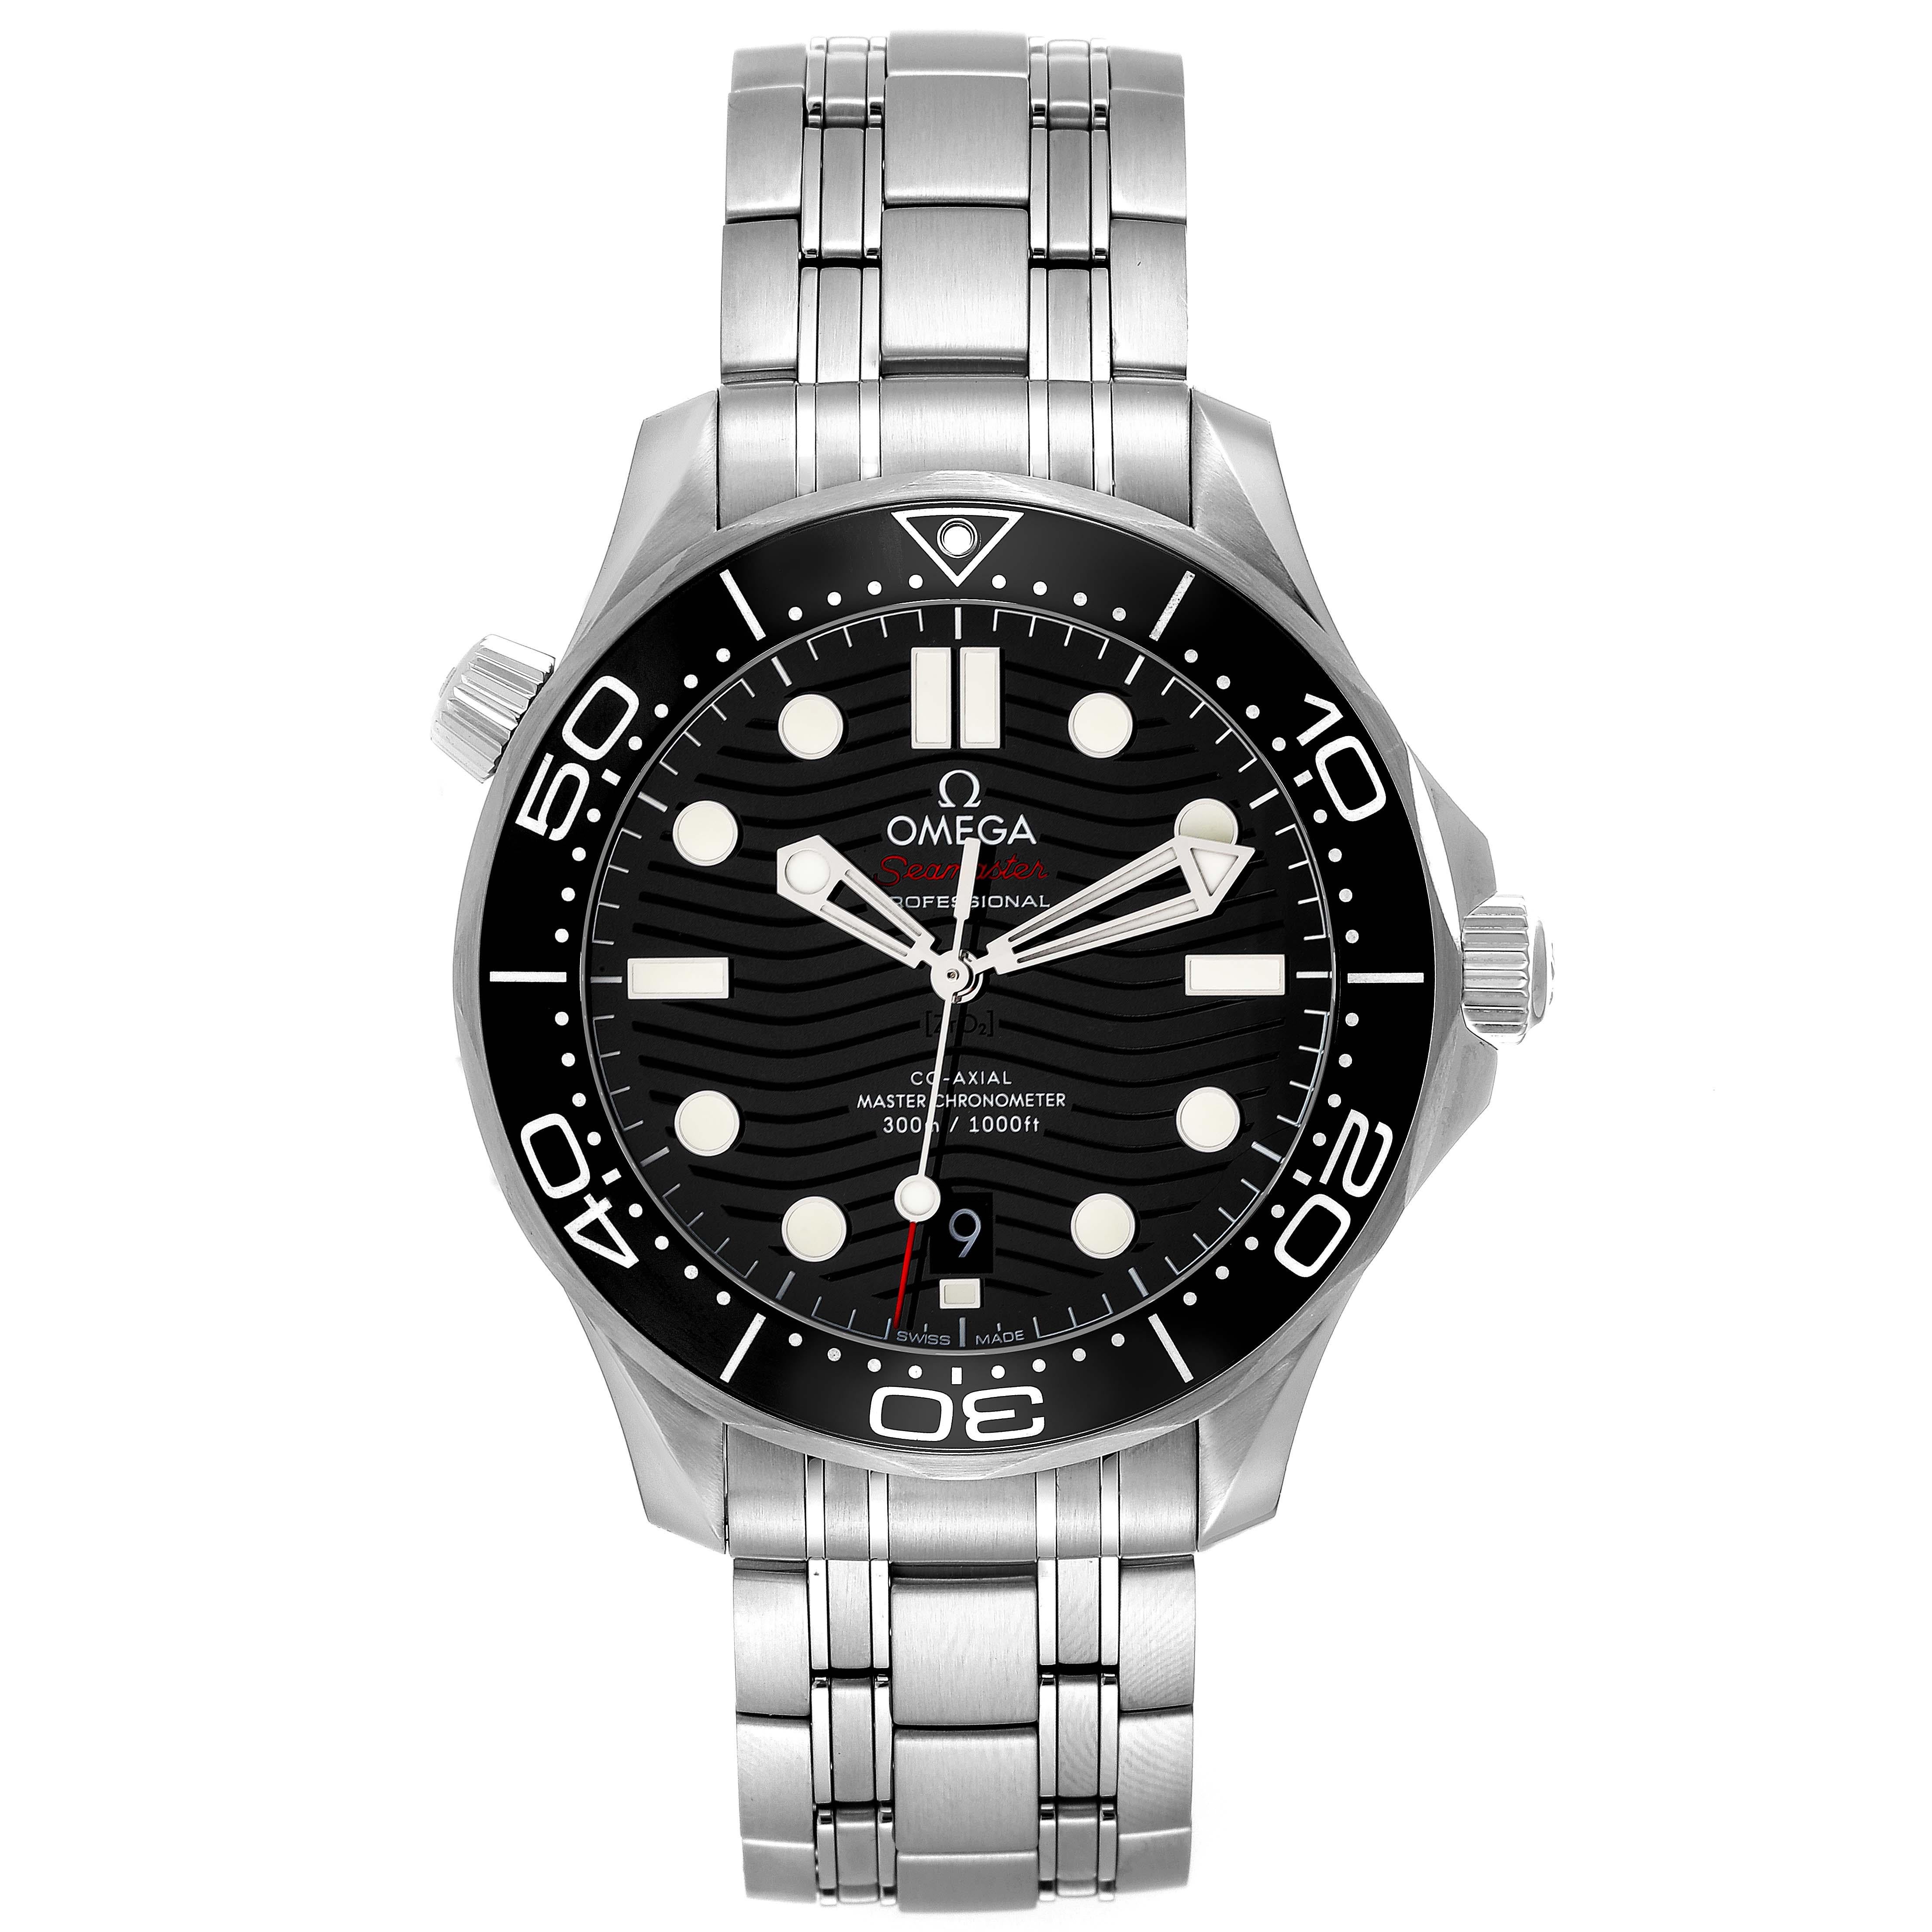 Omega Seamaster Diver 300M Black Dial Steel Mens Watch 210.30.42.20.01.001. Automatic self-winding movement with Co-Axial escapement. Certified Master Chronometer, approved by METAS, resistant to magnetic fields reaching 15,000 gauss. Free